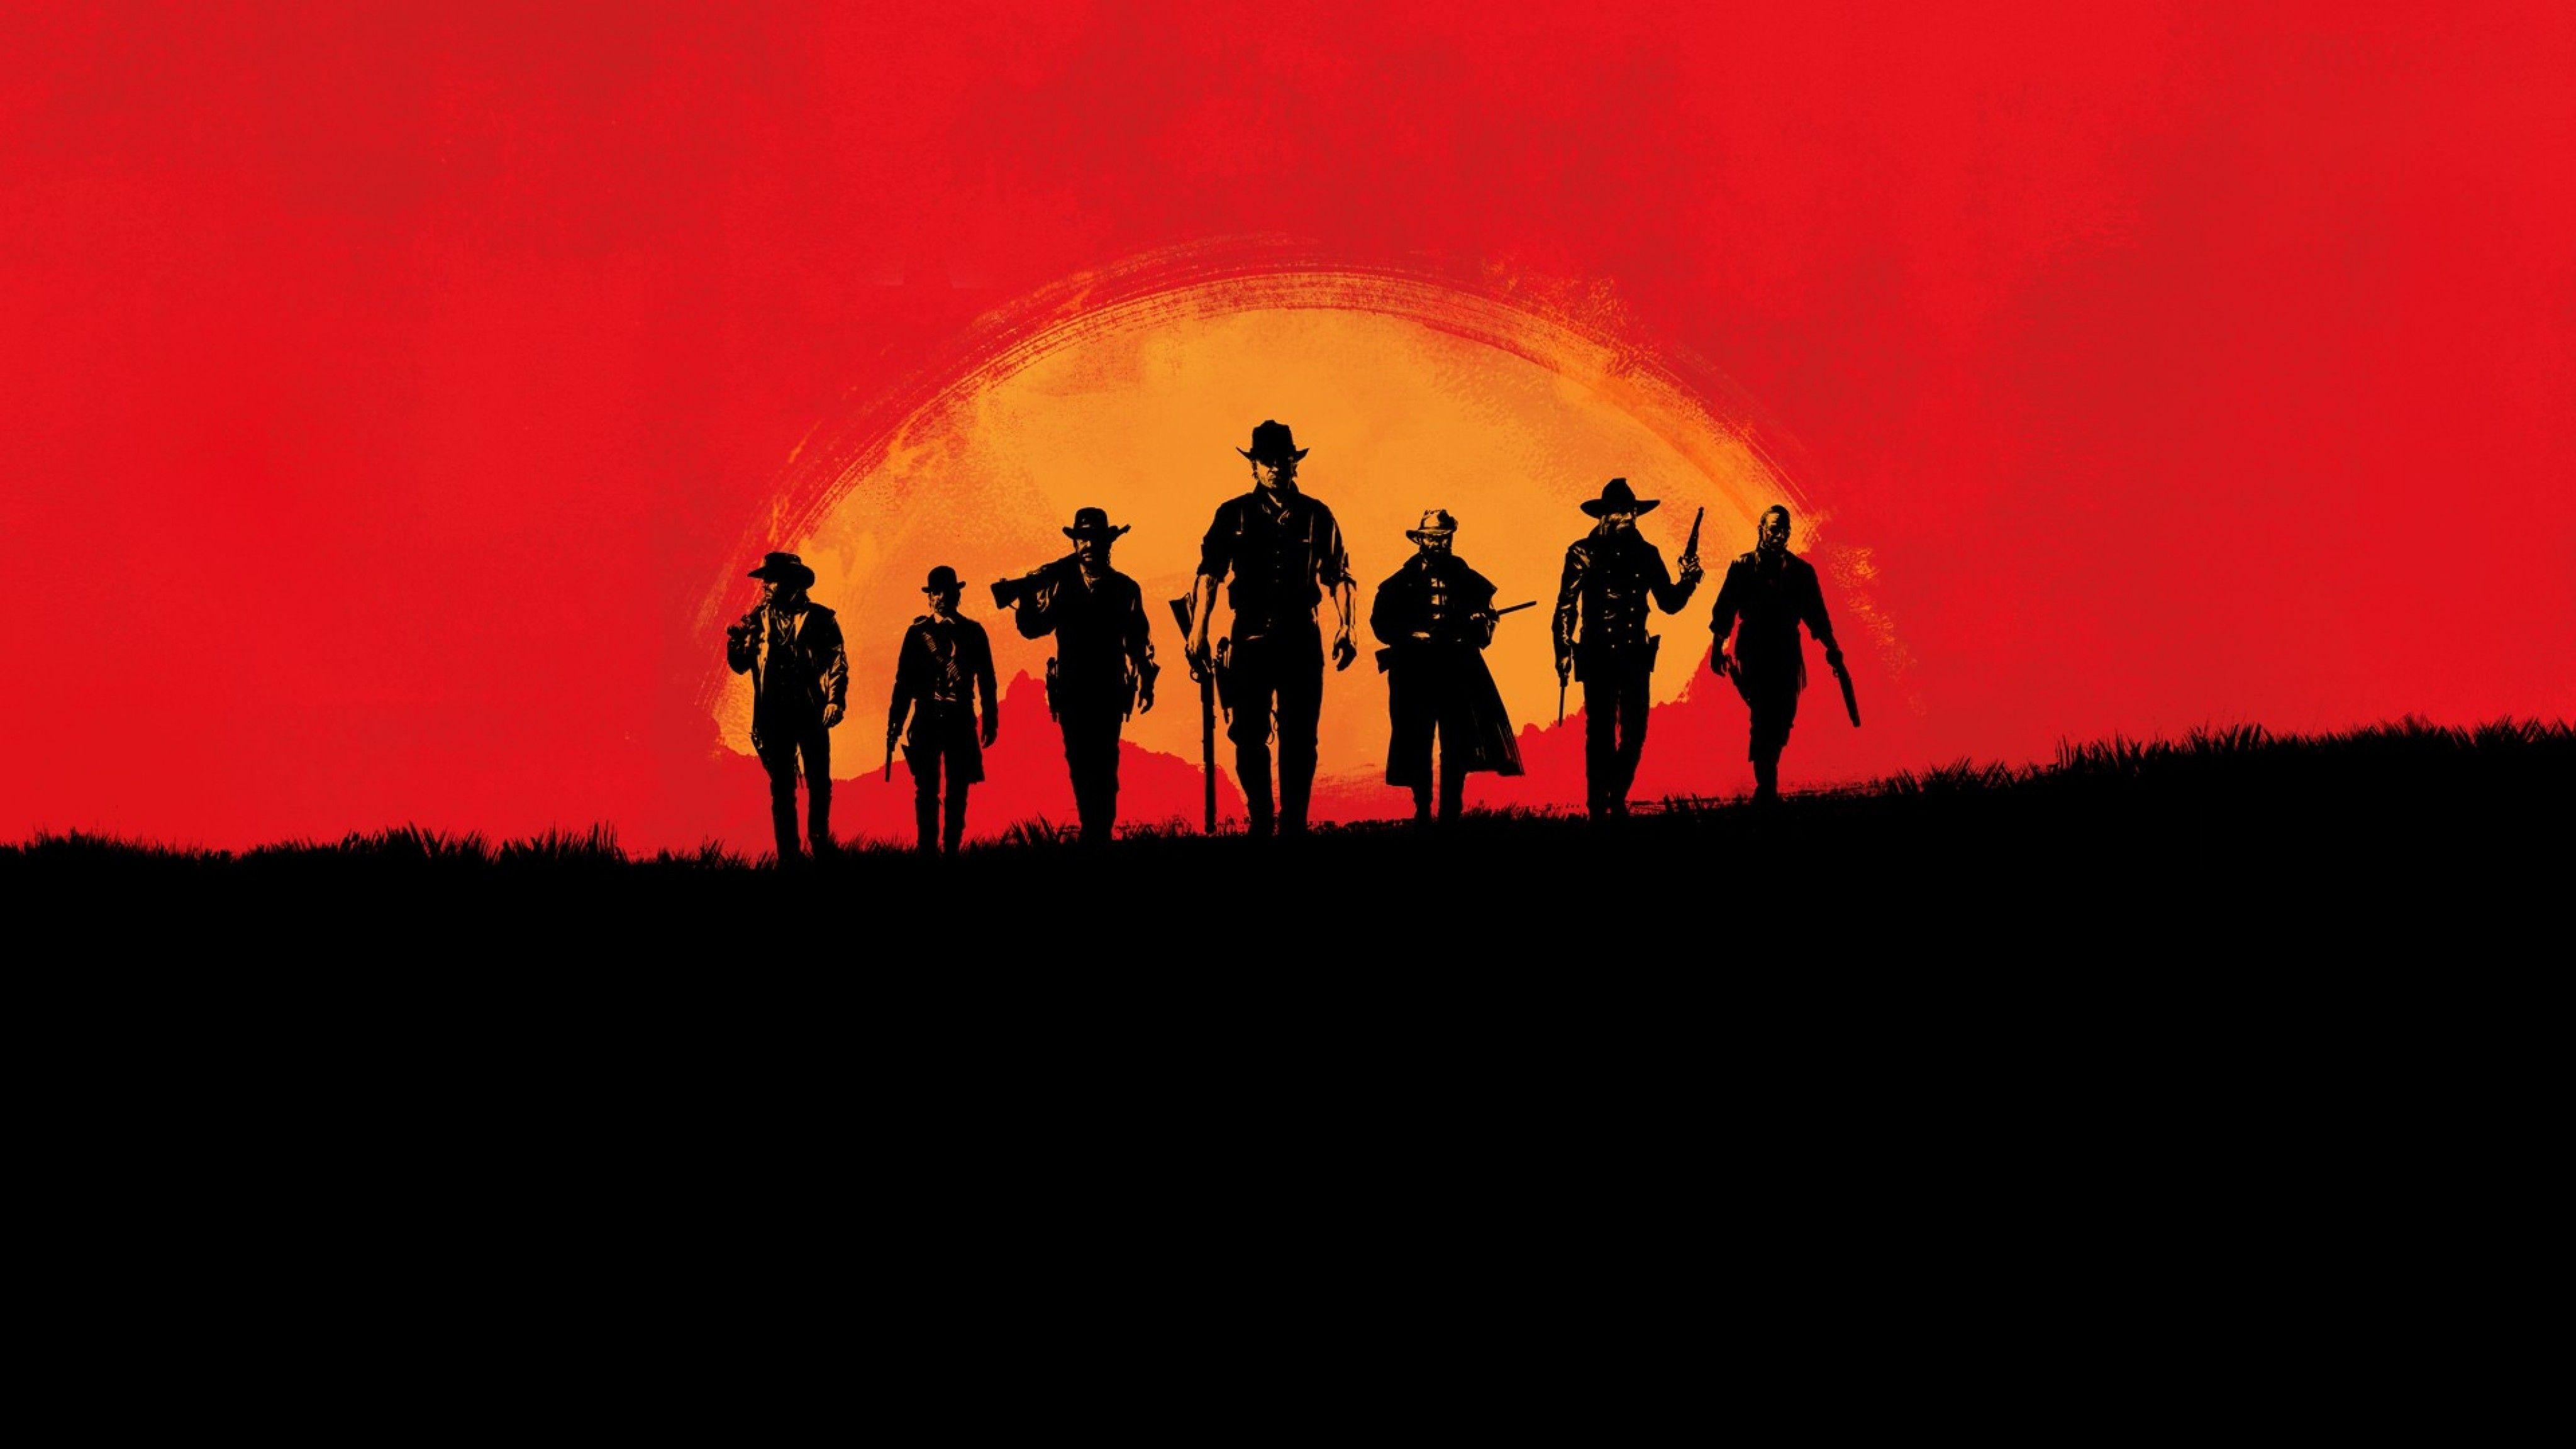 Read red 2. Ред дед редемпшн 2. Red Dead Redemption 2 фон. Red Dead Redemption 2 закат. Red Dead Redemption 2 Sunset.